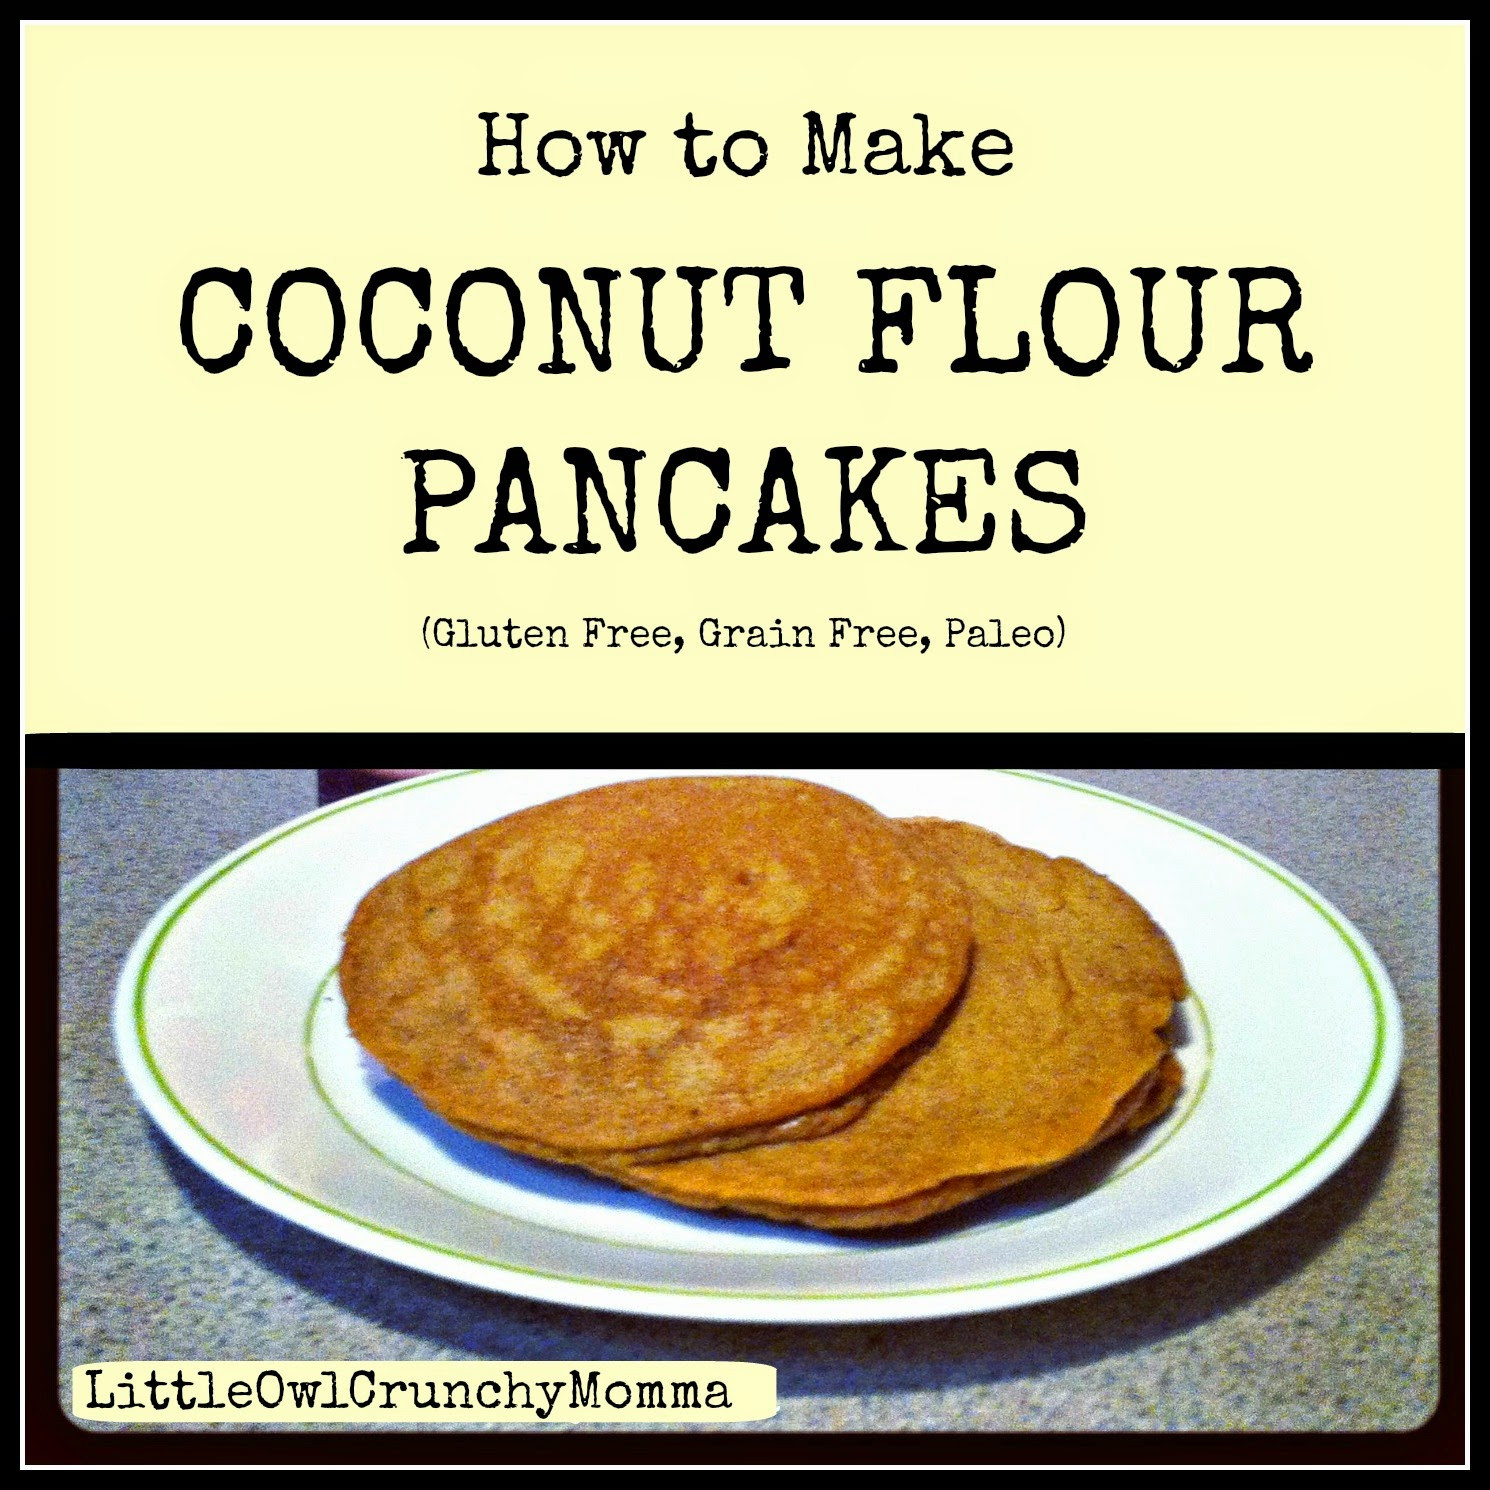 How To Make Pancakes With Flour
 LittleOwlCrunchyMomma How to Make Coconut Flour Pancakes